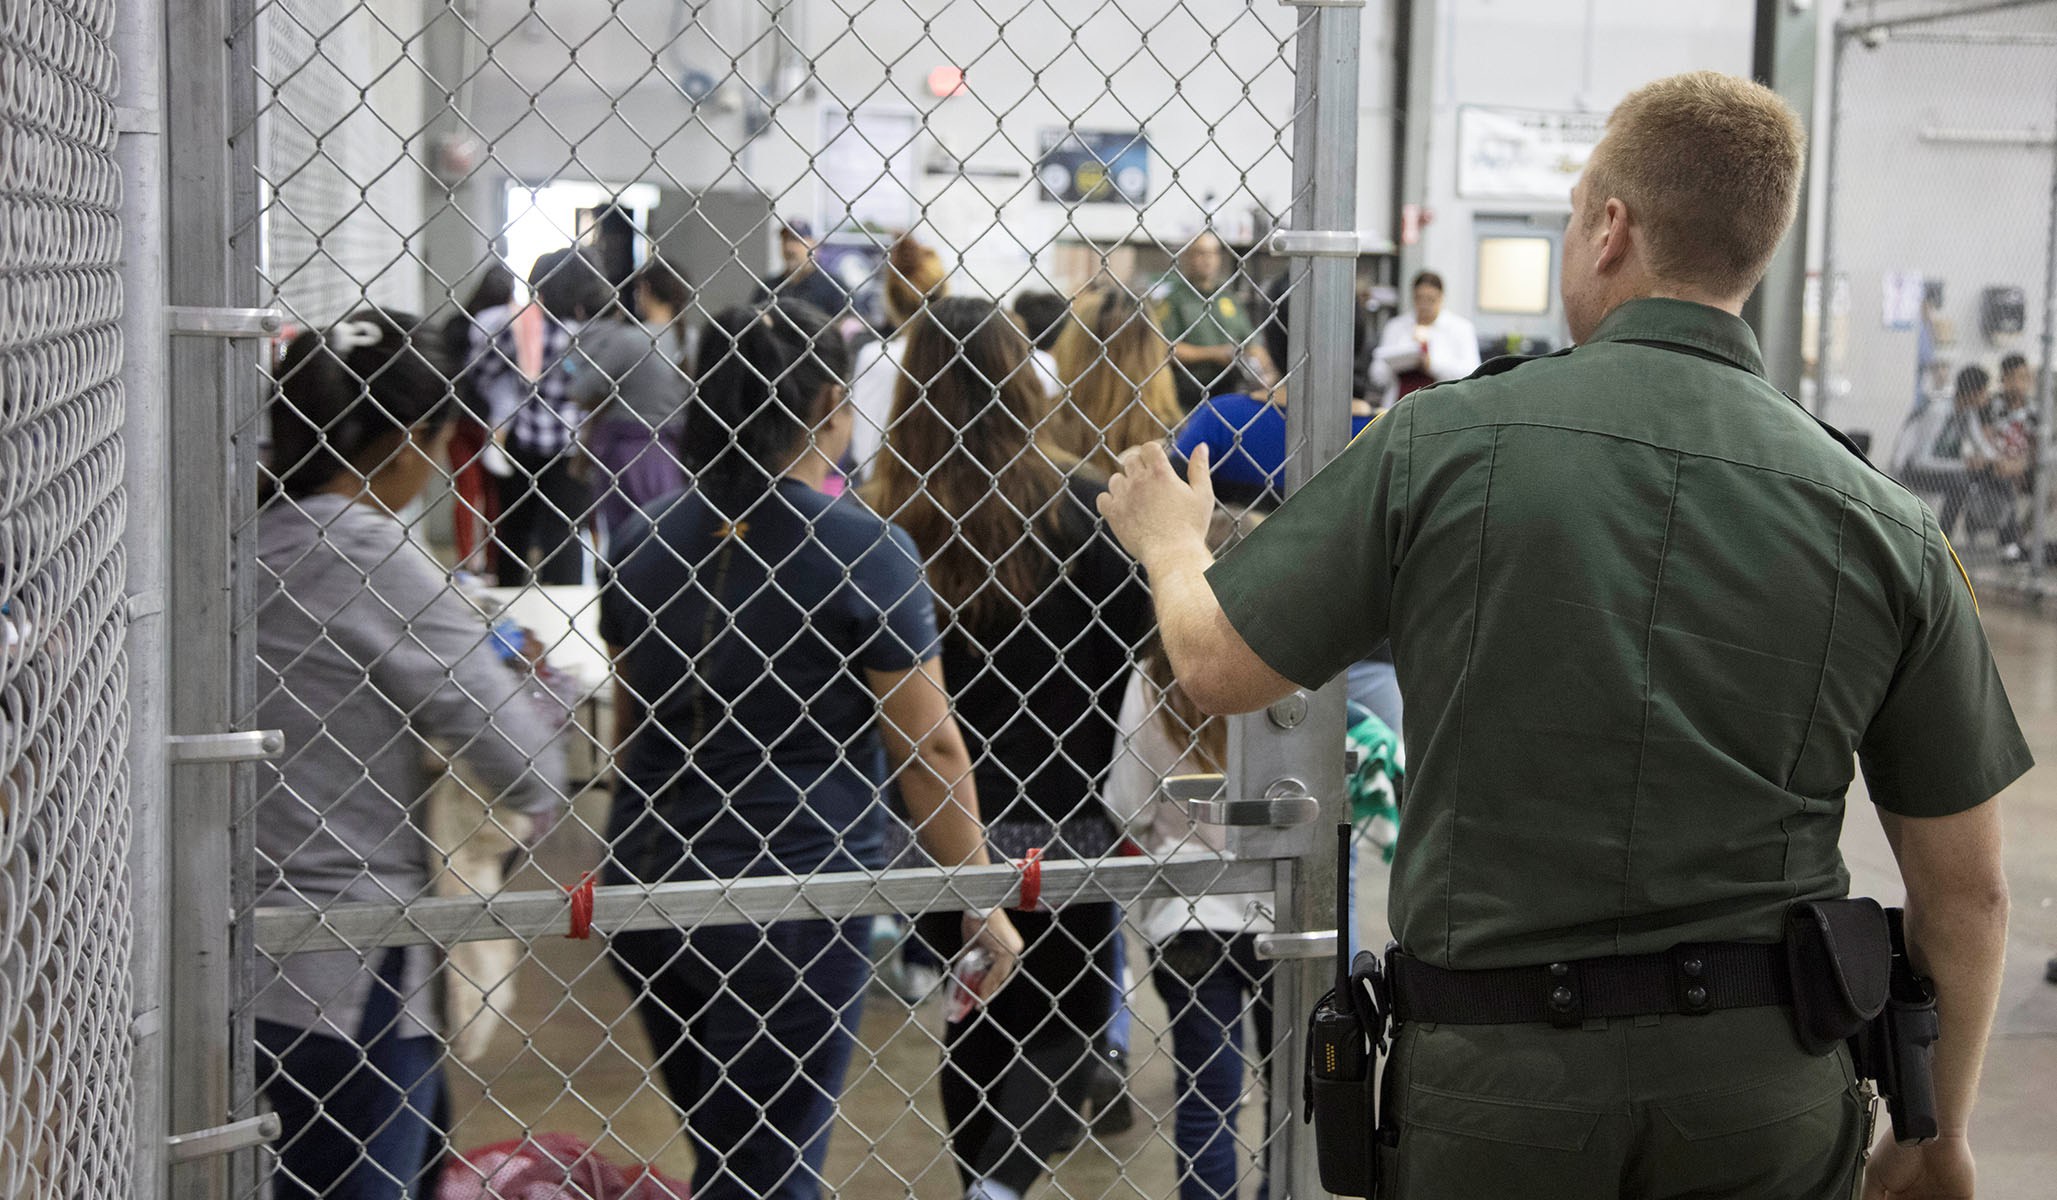 Inside U.S. Customs and Border Protection detention facility